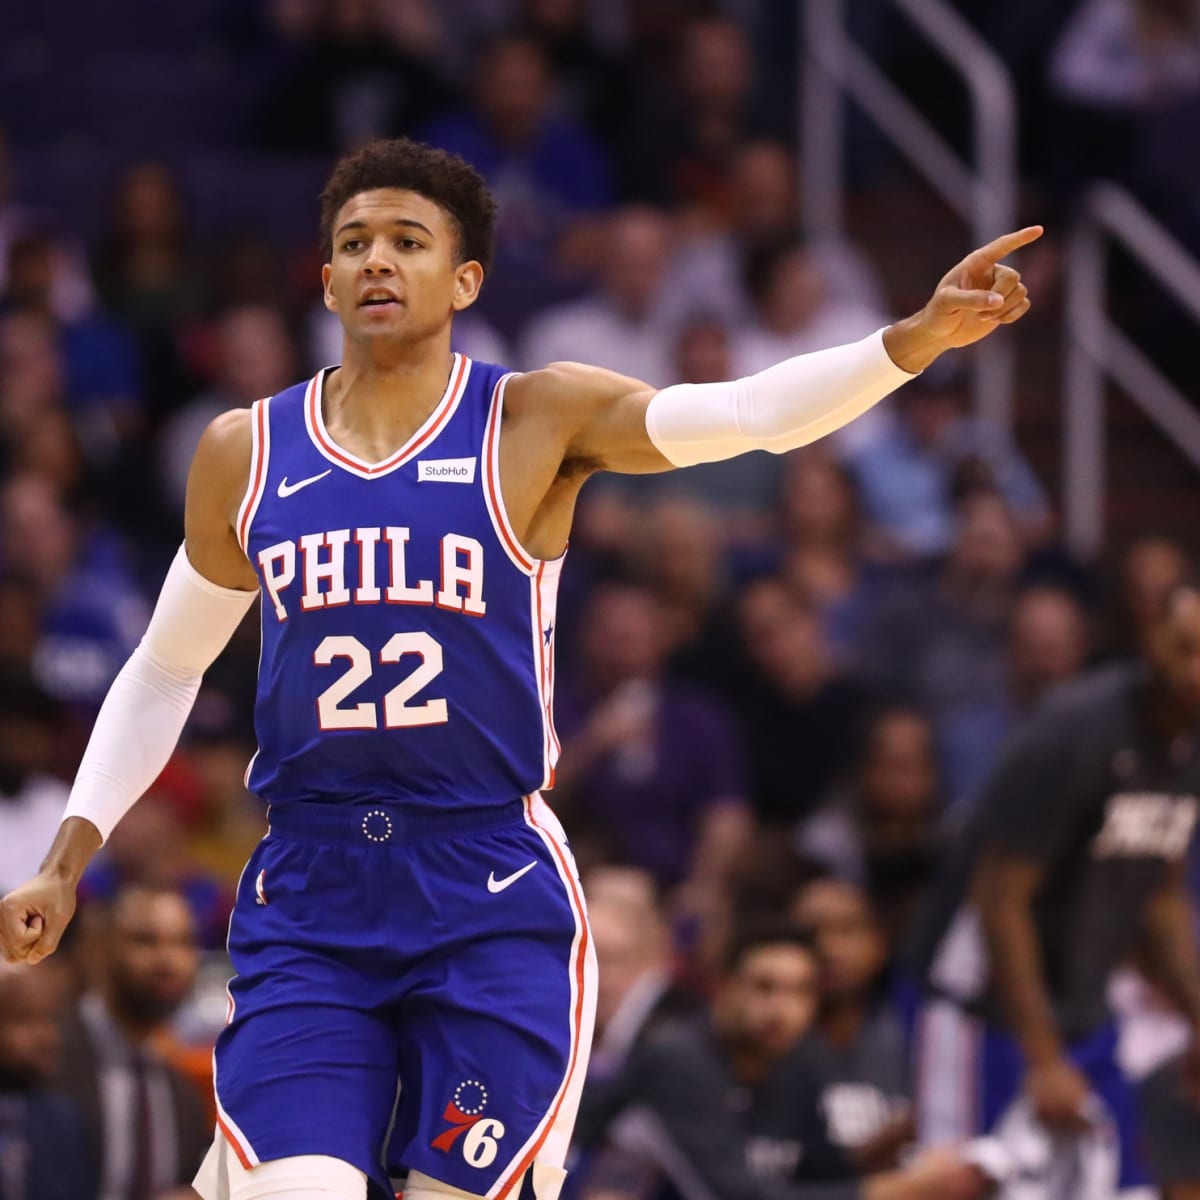 With Fishtown mural, Sixers' Matisse Thybulle will benefit Philly parks